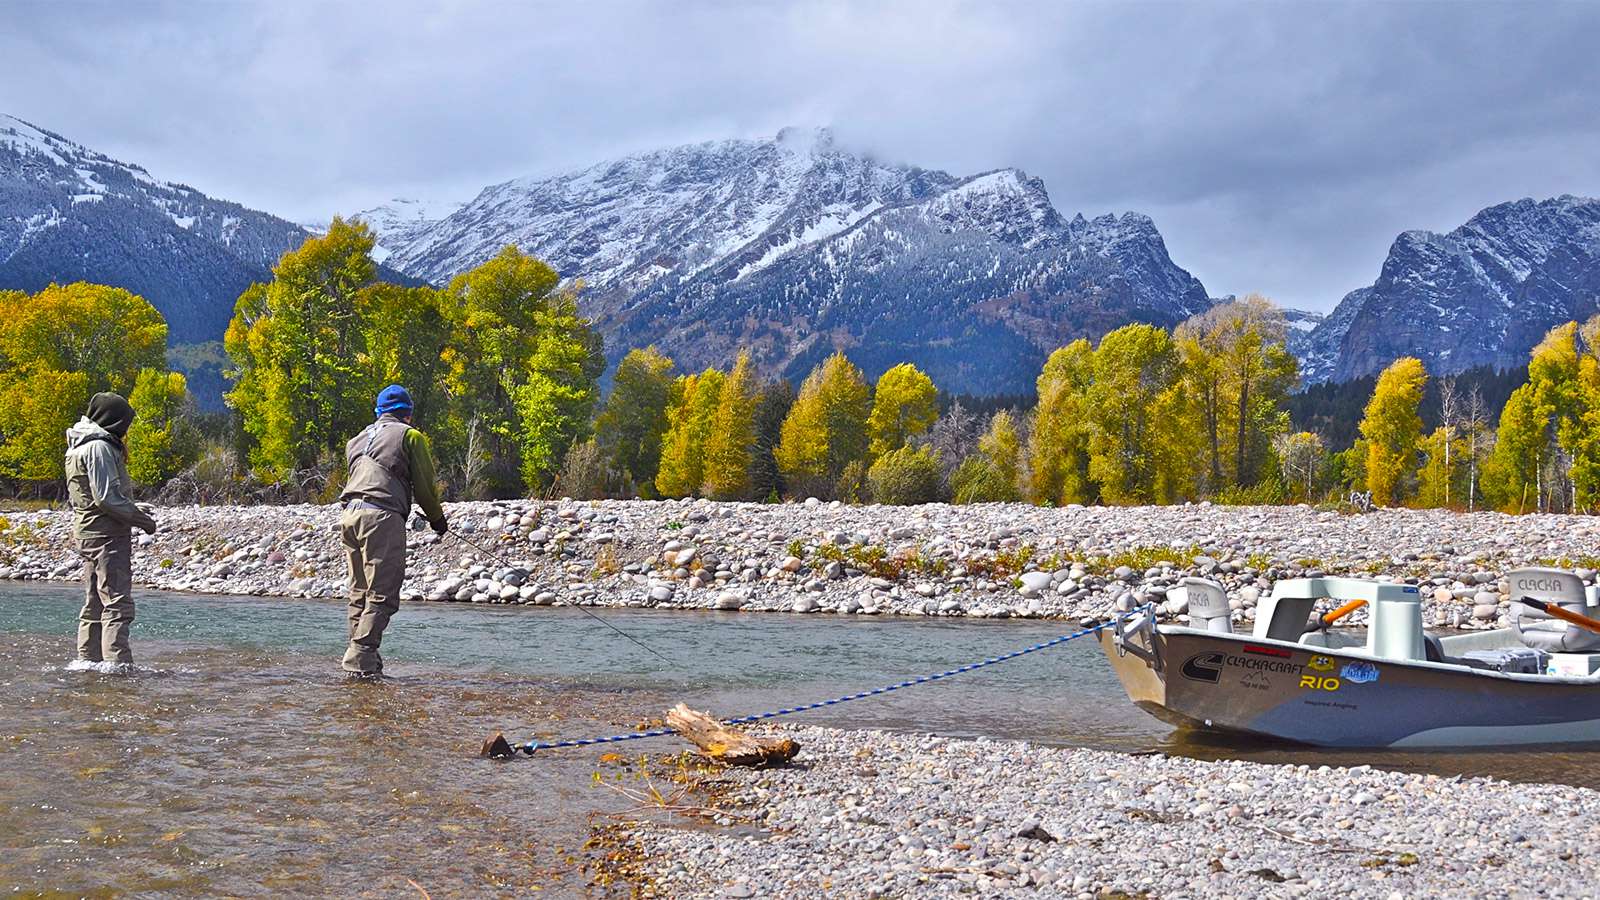 Jackson Hole Fly Fishing snake river with snowy mountains in the background